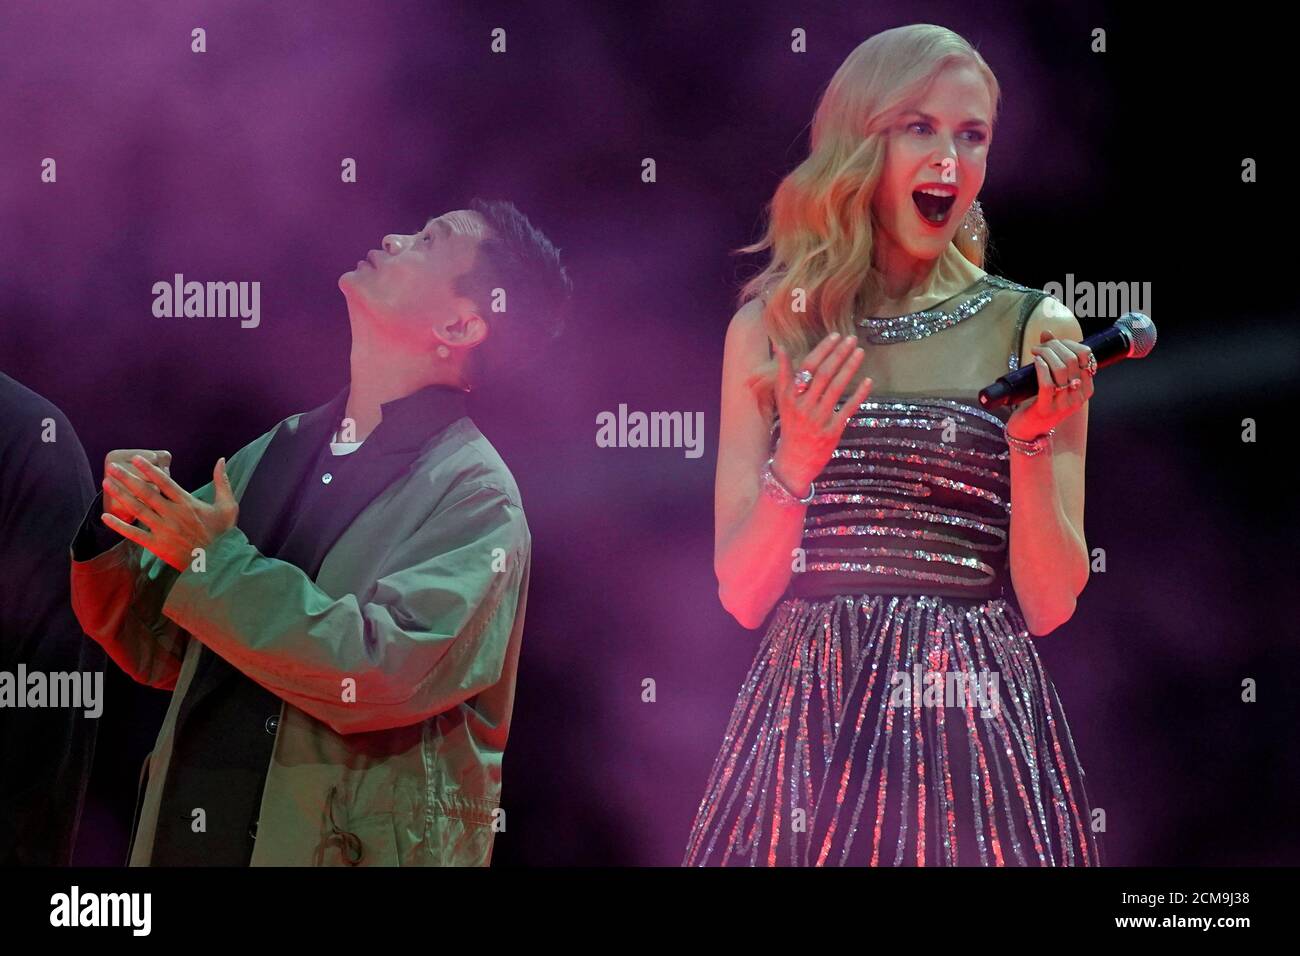 Jack Ma, Chairman of Alibaba Group, and actor Nicole Kidman attend a show  during Alibaba Group's 11.11 Singles' Day global shopping festival in  Shanghai, China, November 10, 2017. REUTERS/Aly Song Stock Photo - Alamy